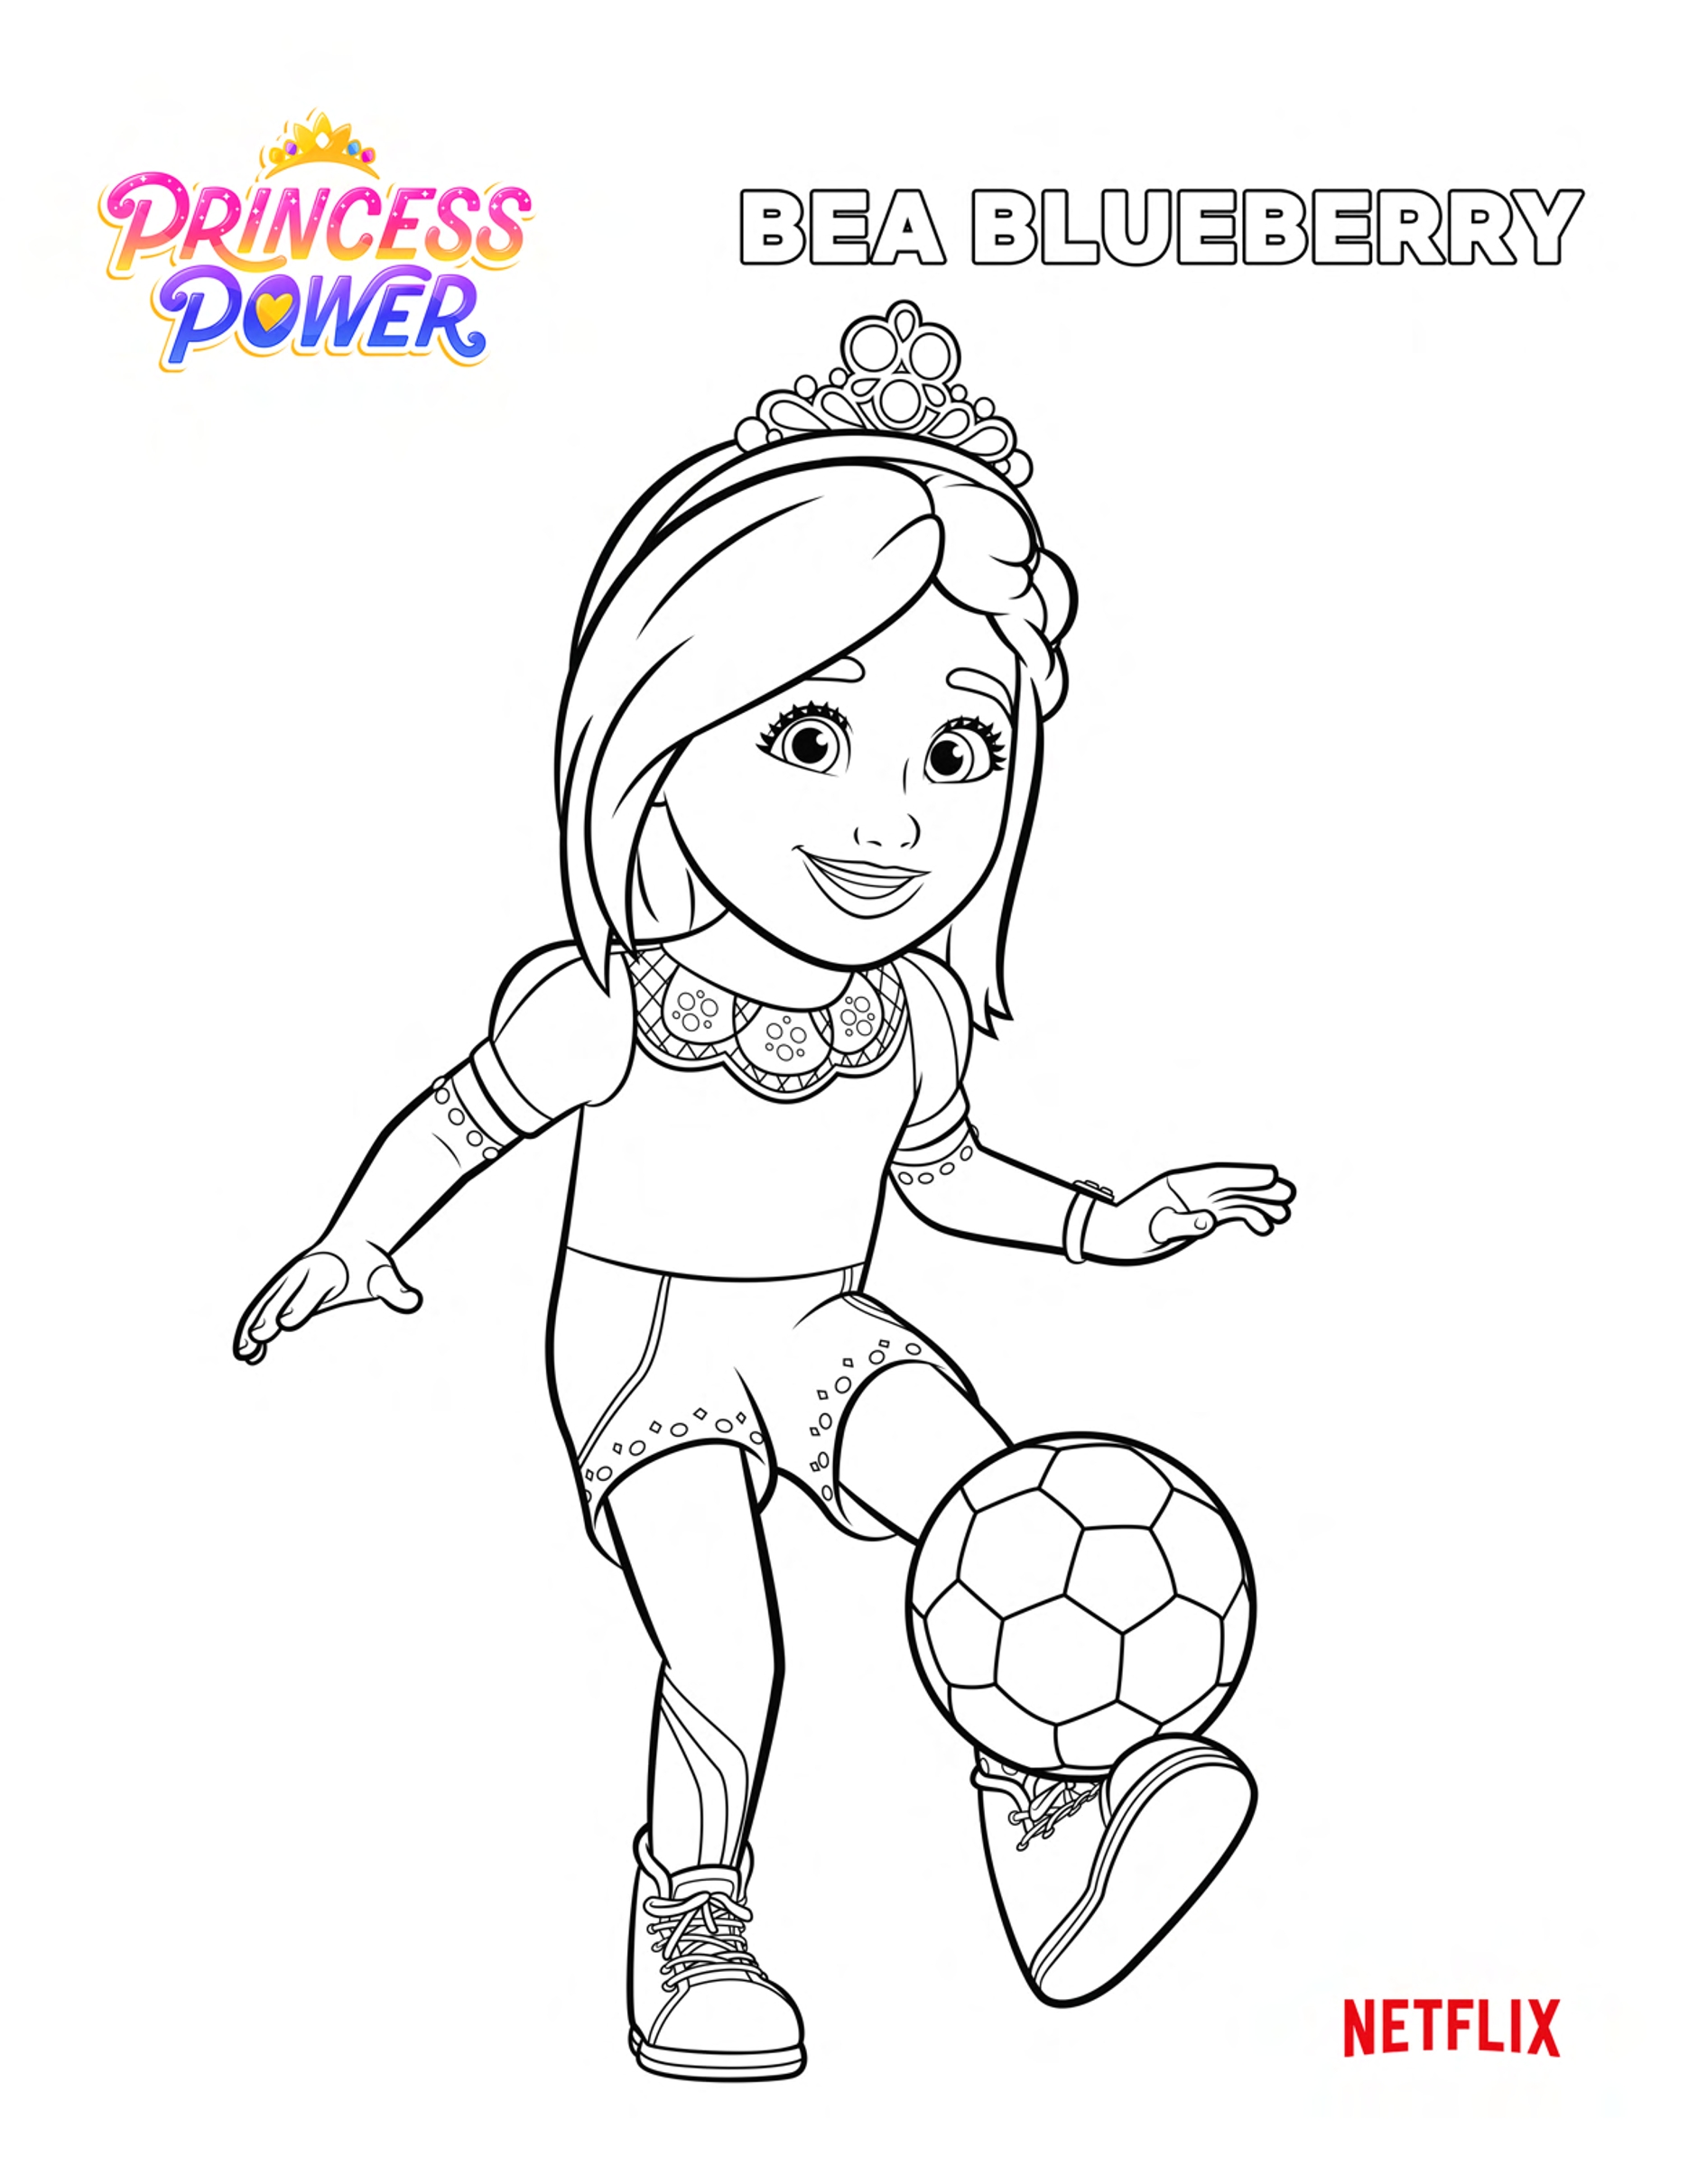 Bea Blueberry - Princess Power Coloring Page - Coloring Home